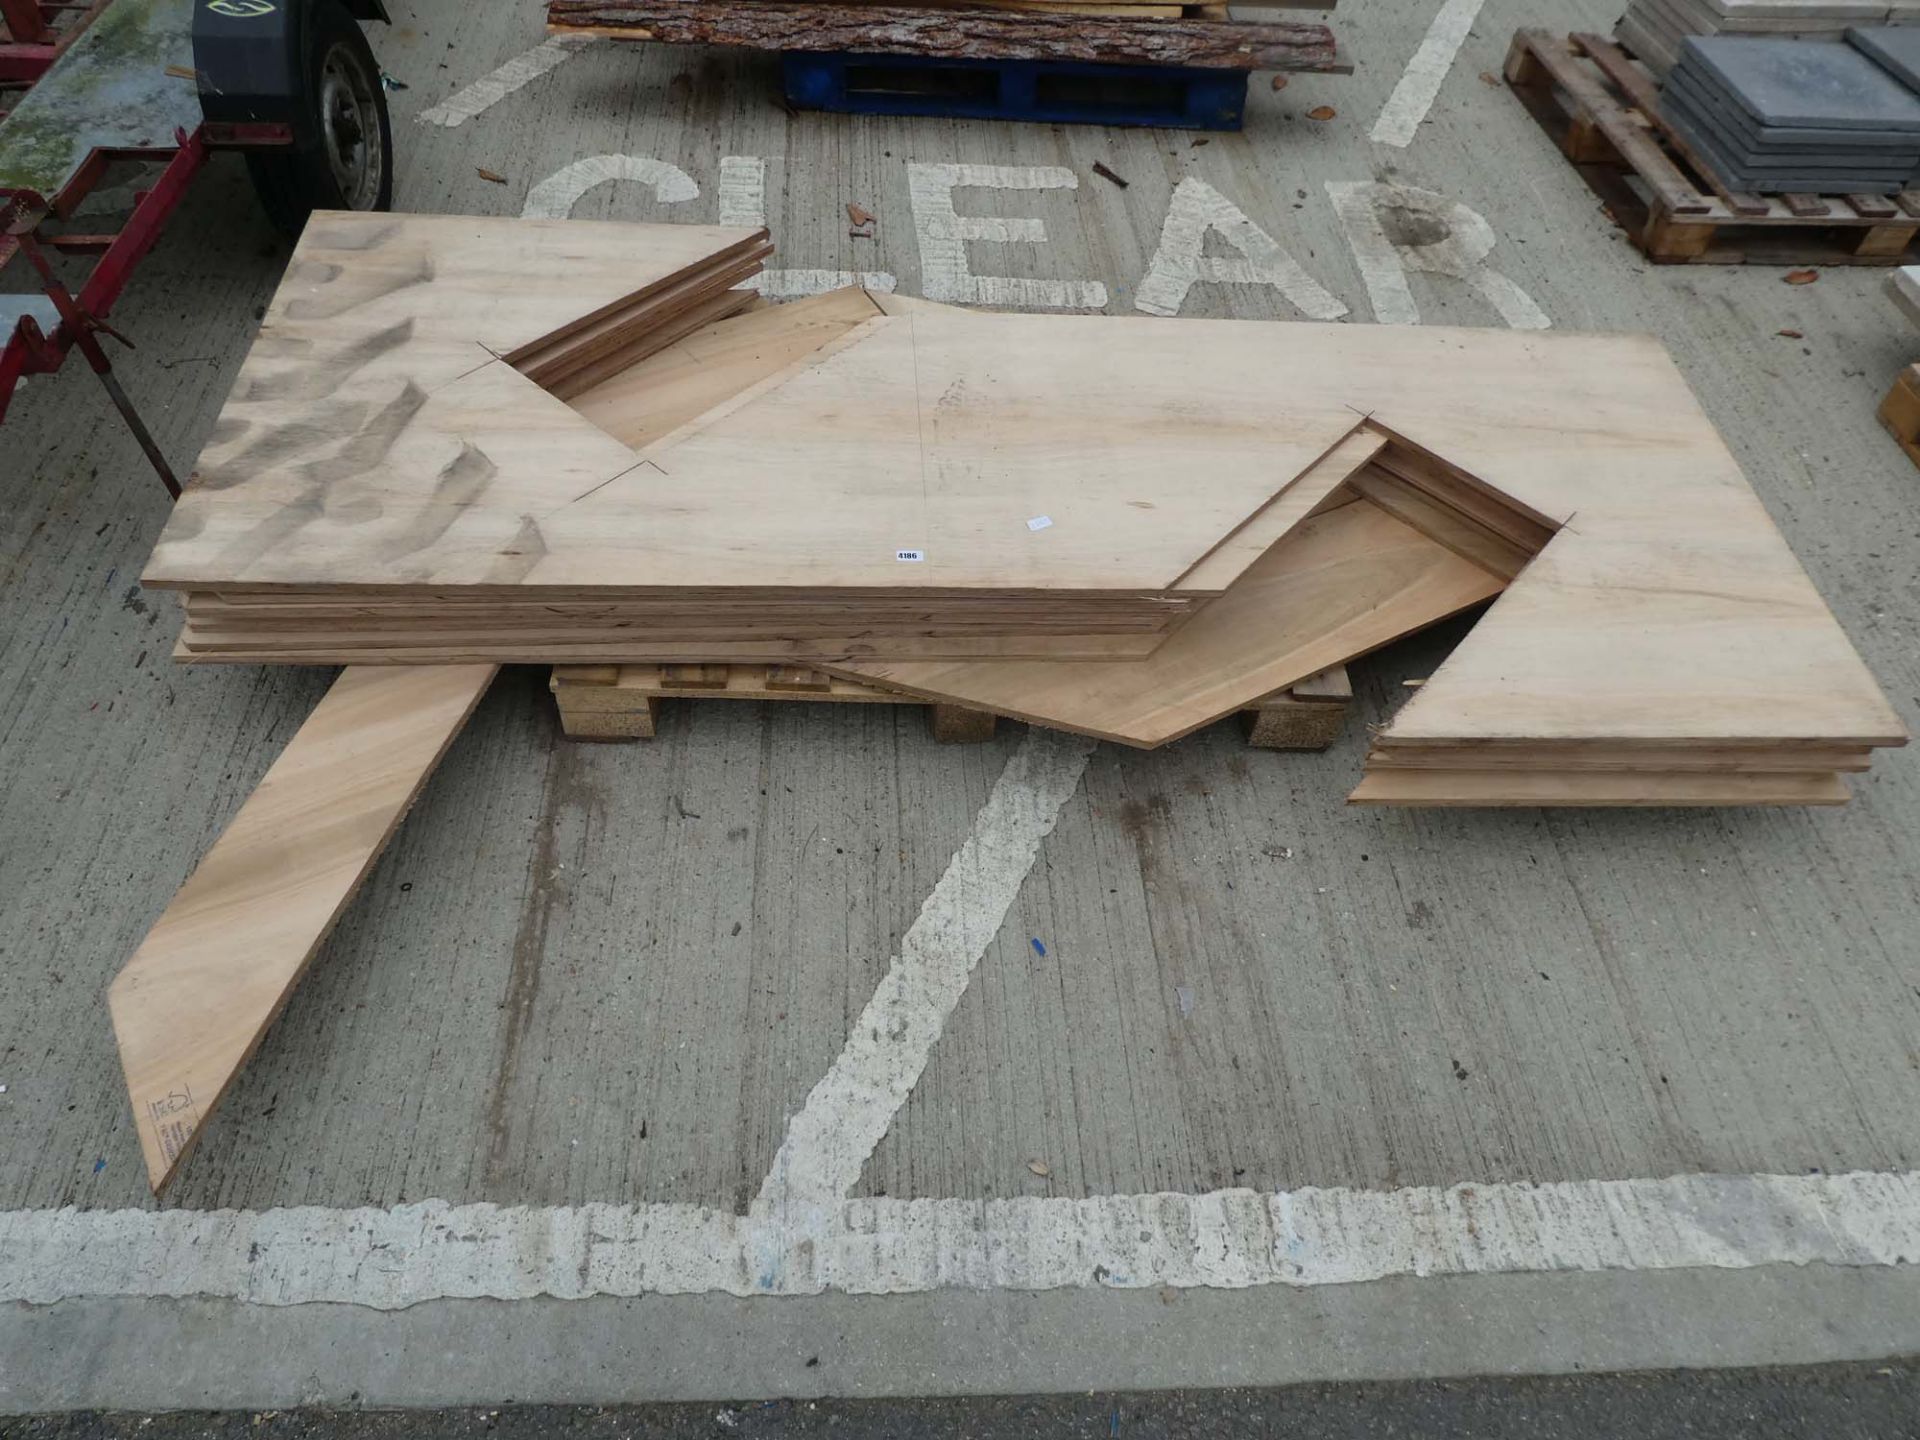 Quantity of off-cuts of plywood